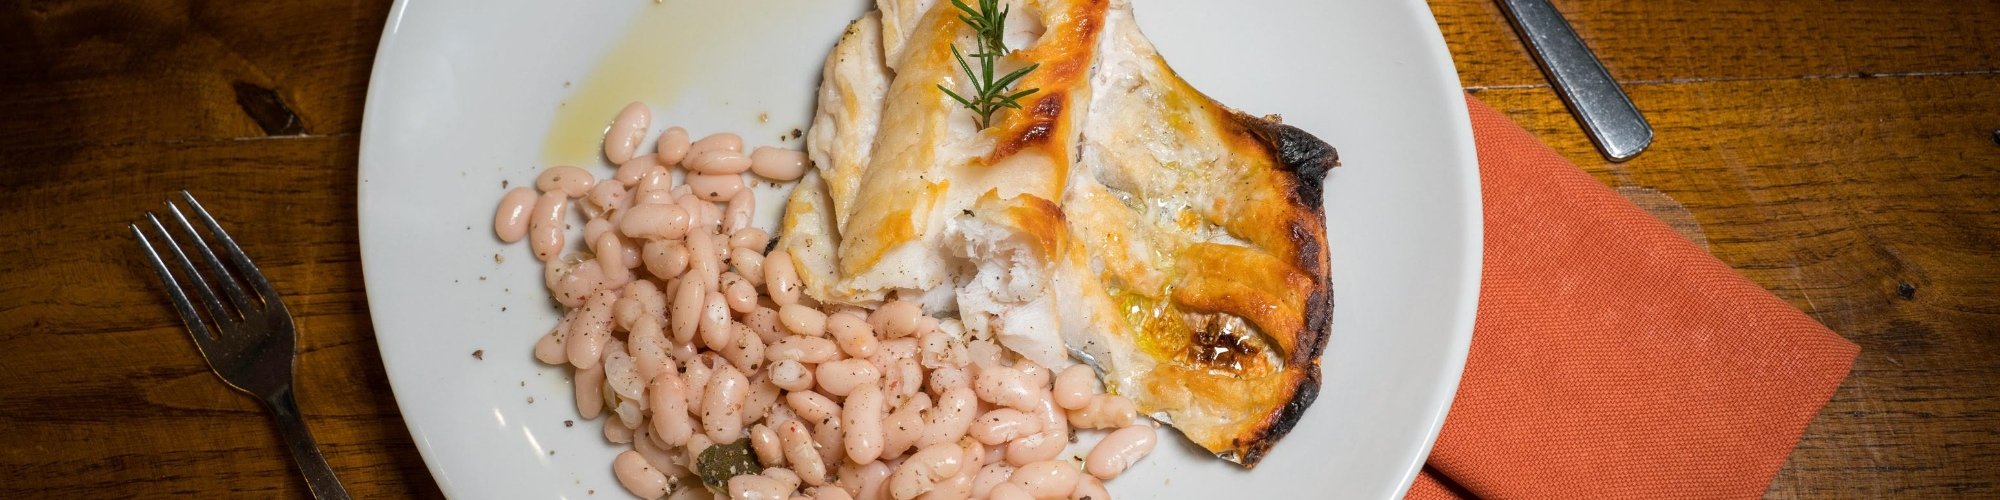 Sorana beans with grilled cod fish